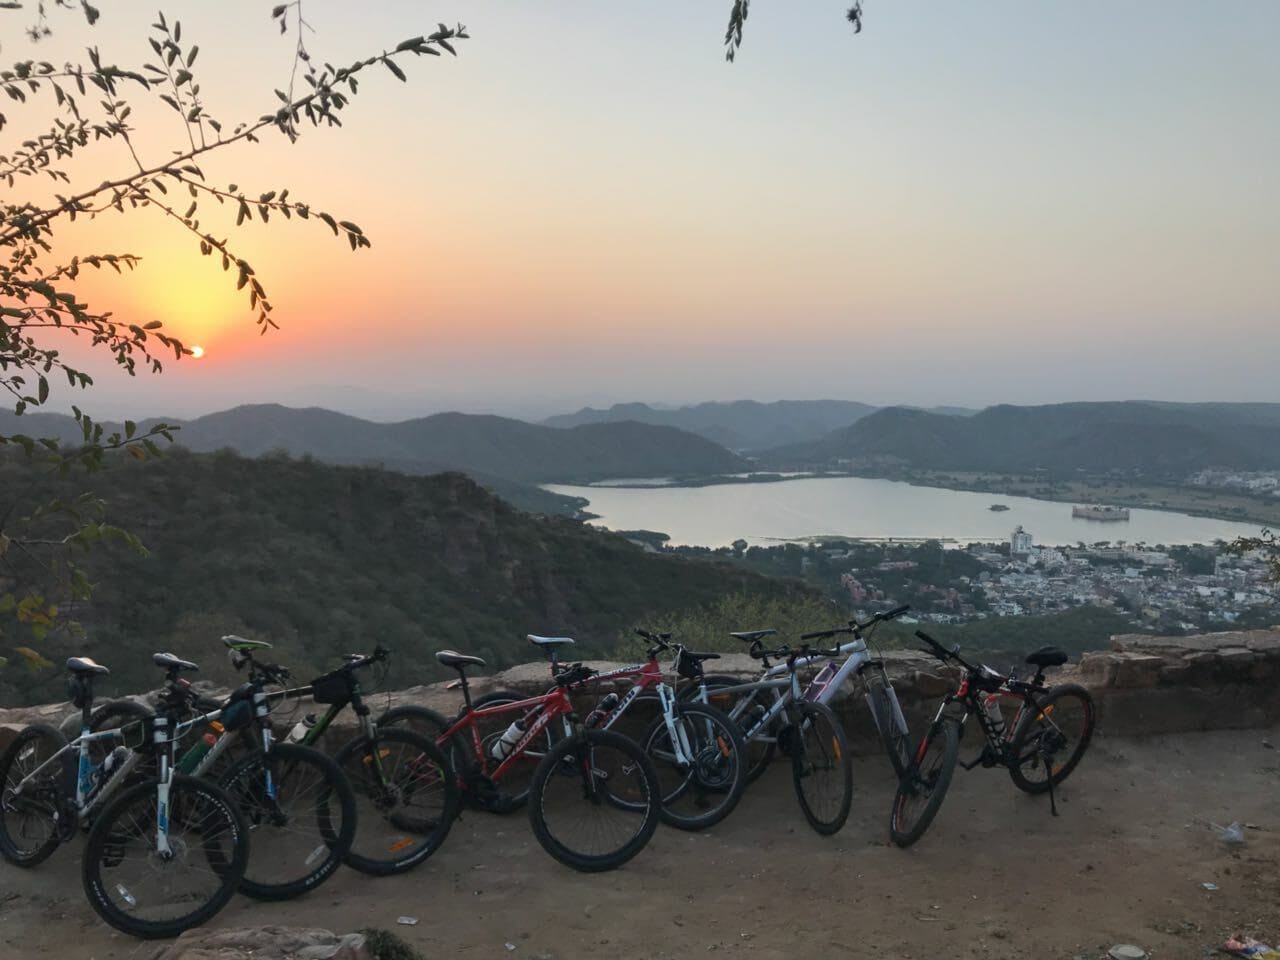 Bicycles parked outside the fort, with wonderful views of Jal Mahal and the lake in the background